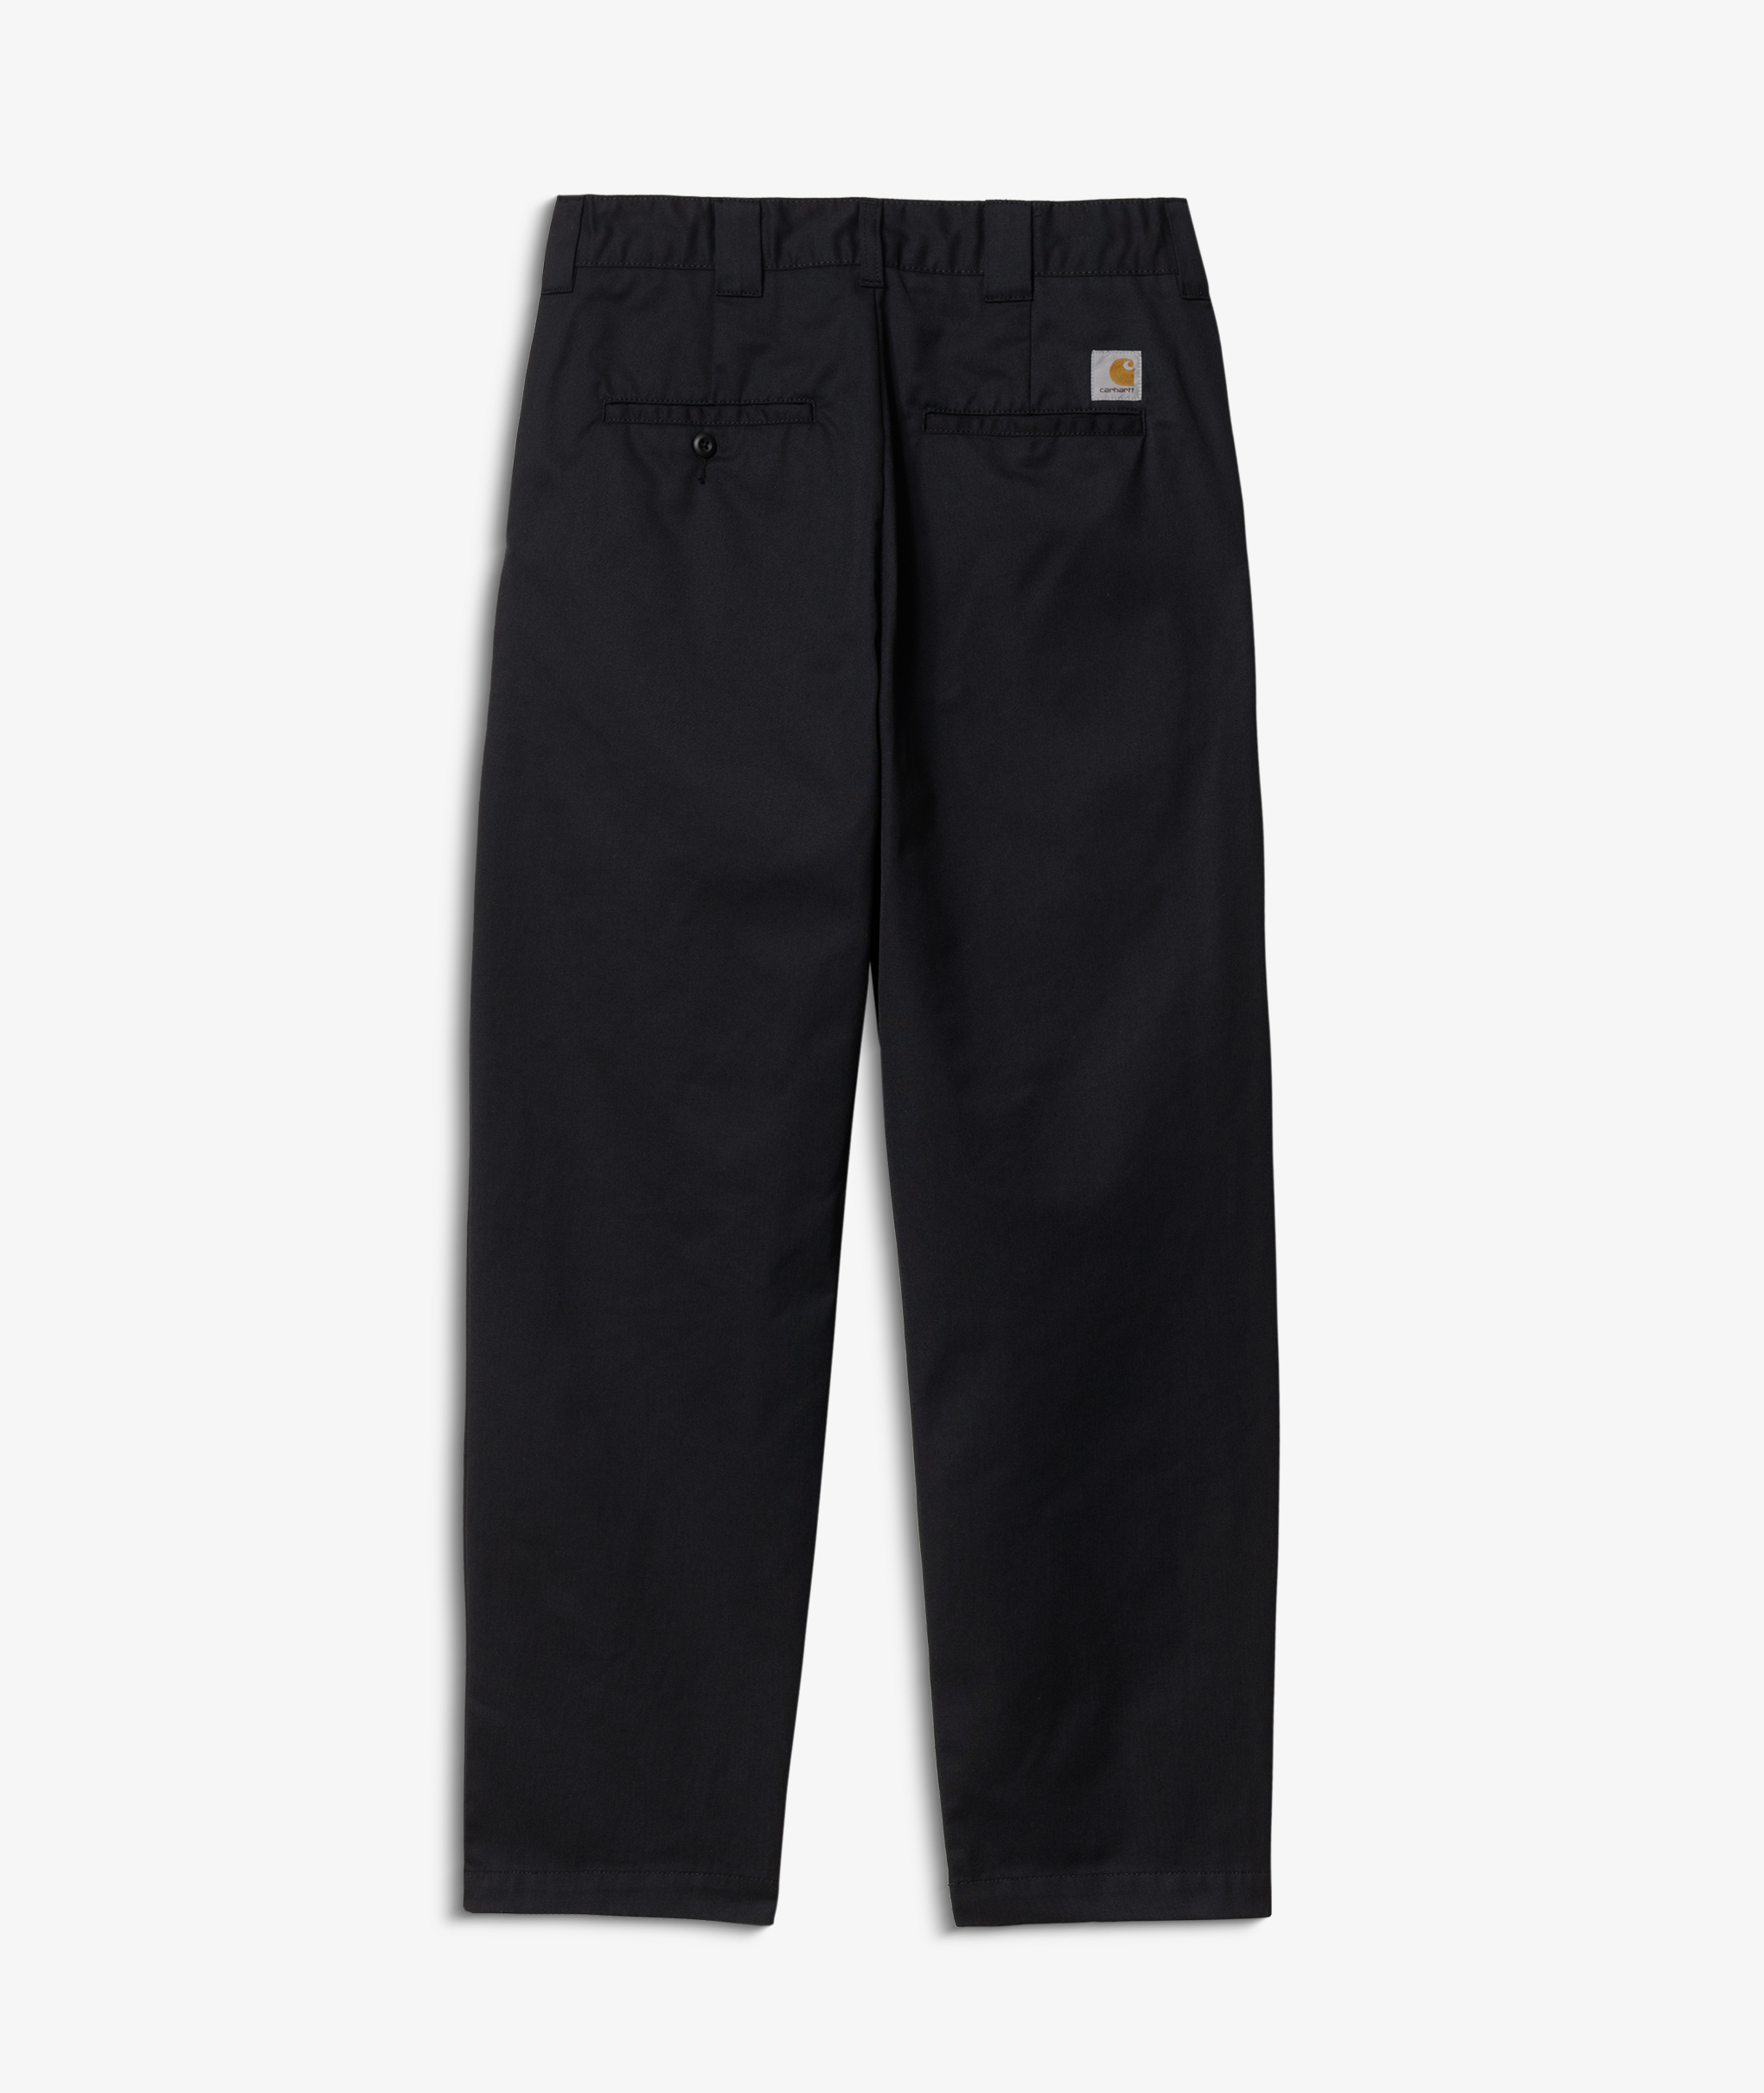 Norse Store | Shipping Worldwide - Carhartt WIP Craft Pant - Black